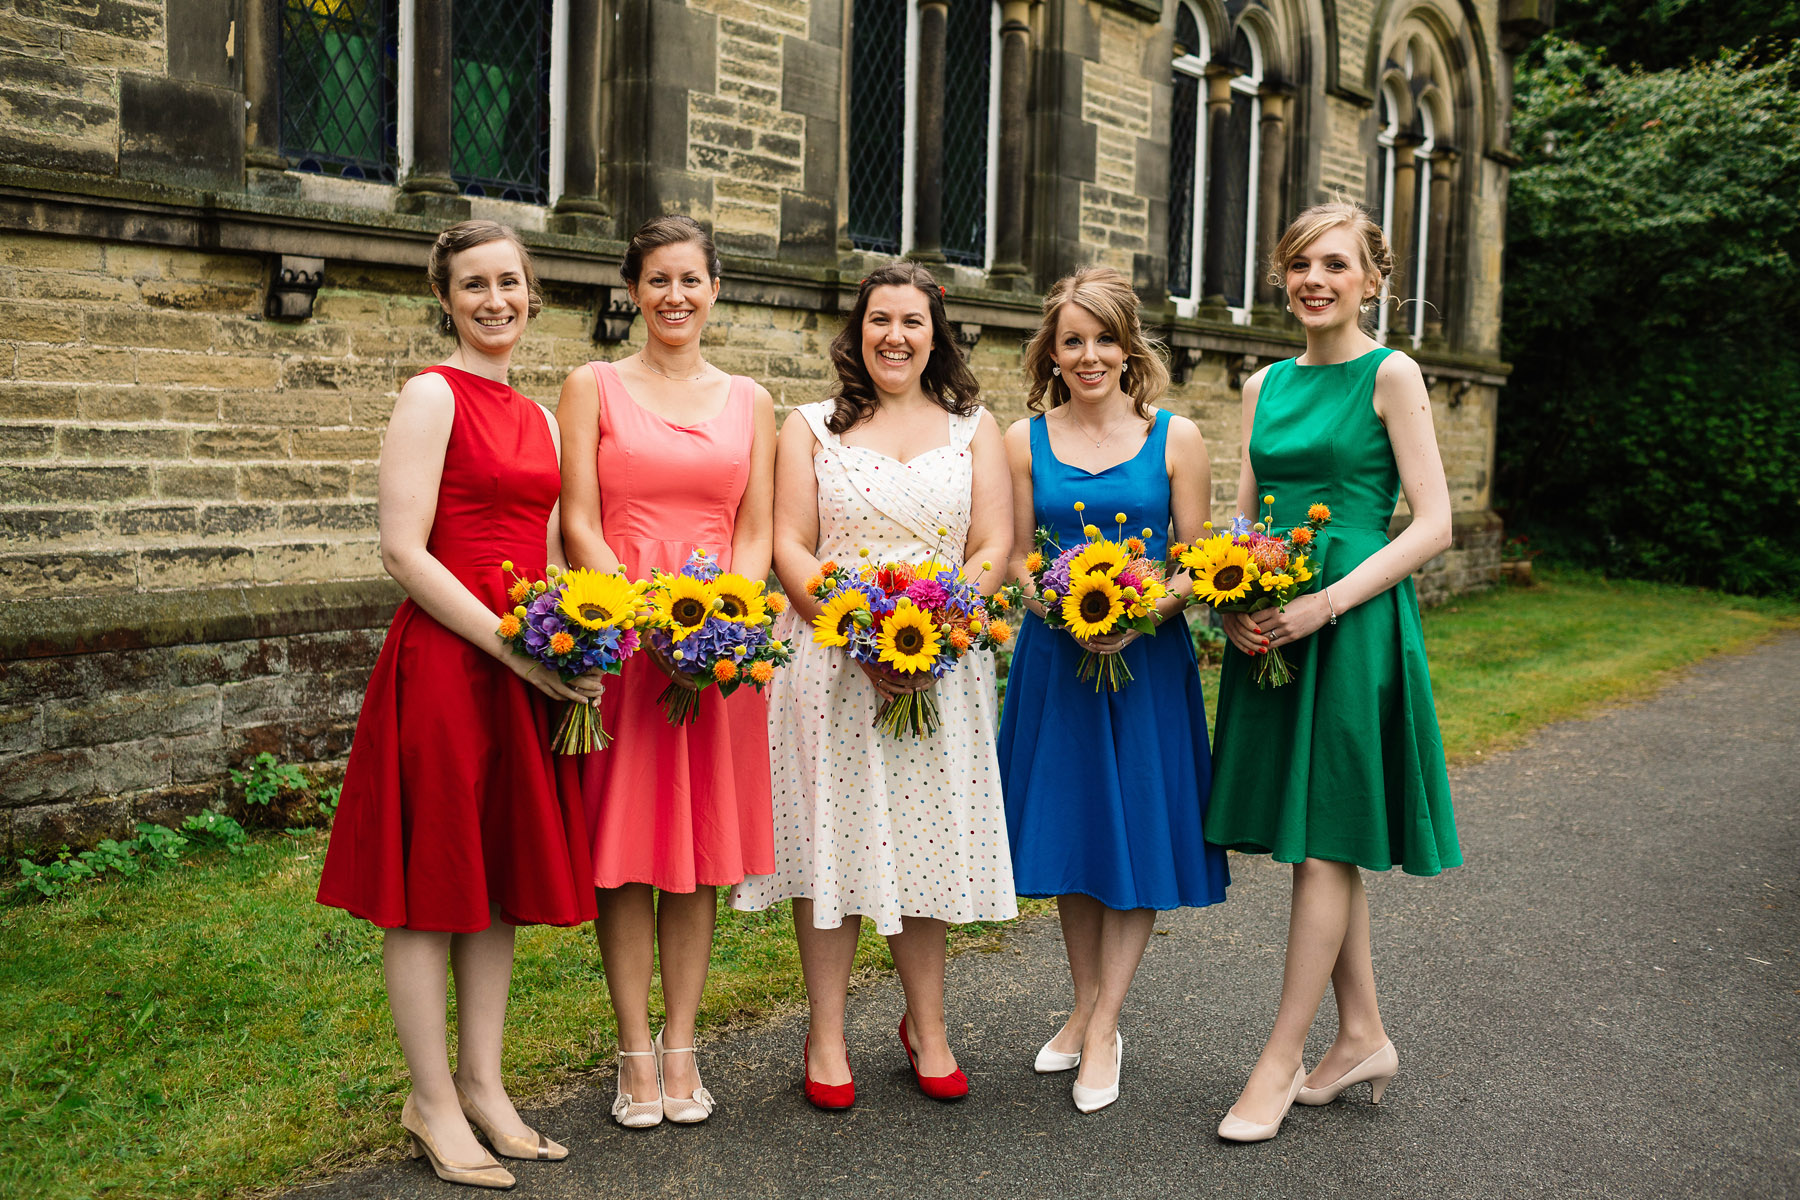 Morena + Ian's fun and colourful wedding at The White Hart in ydgate, Oldham by Paul Joseph Photography.